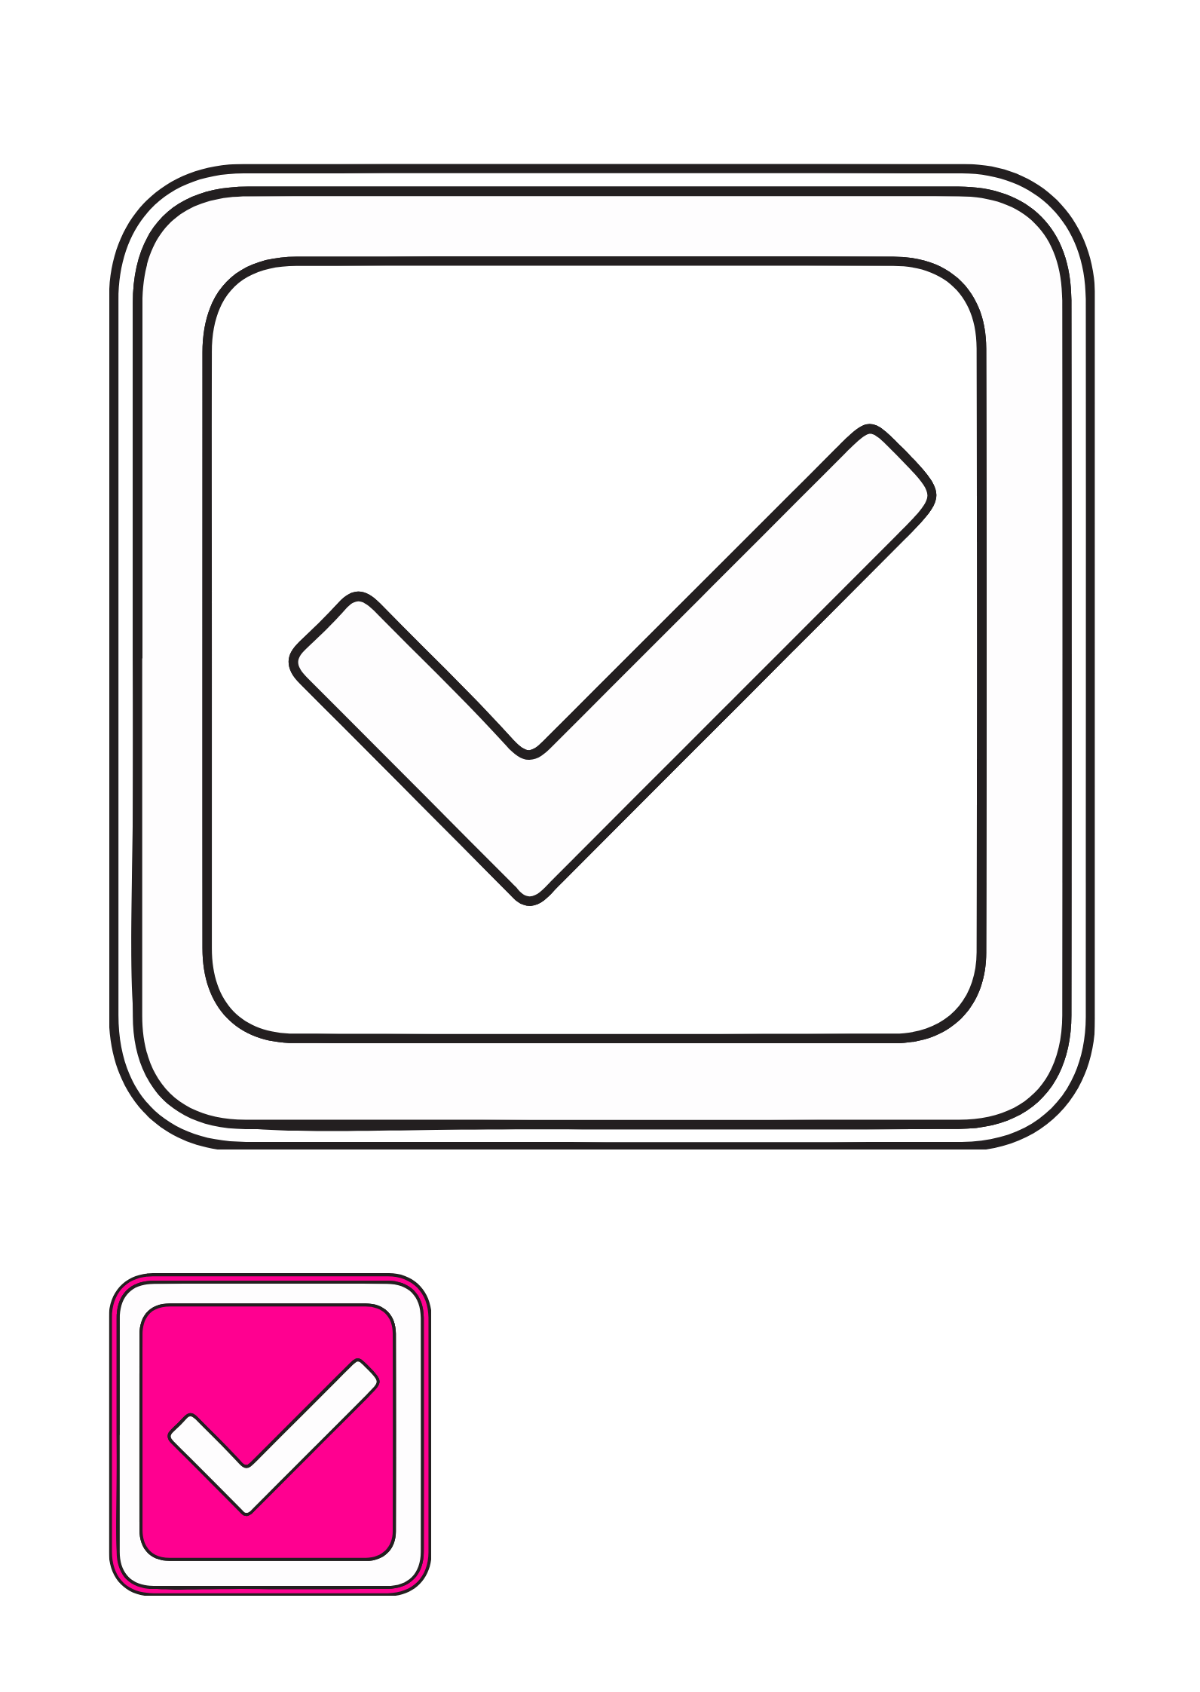 Pink Check/Tick Mark Coloring Page